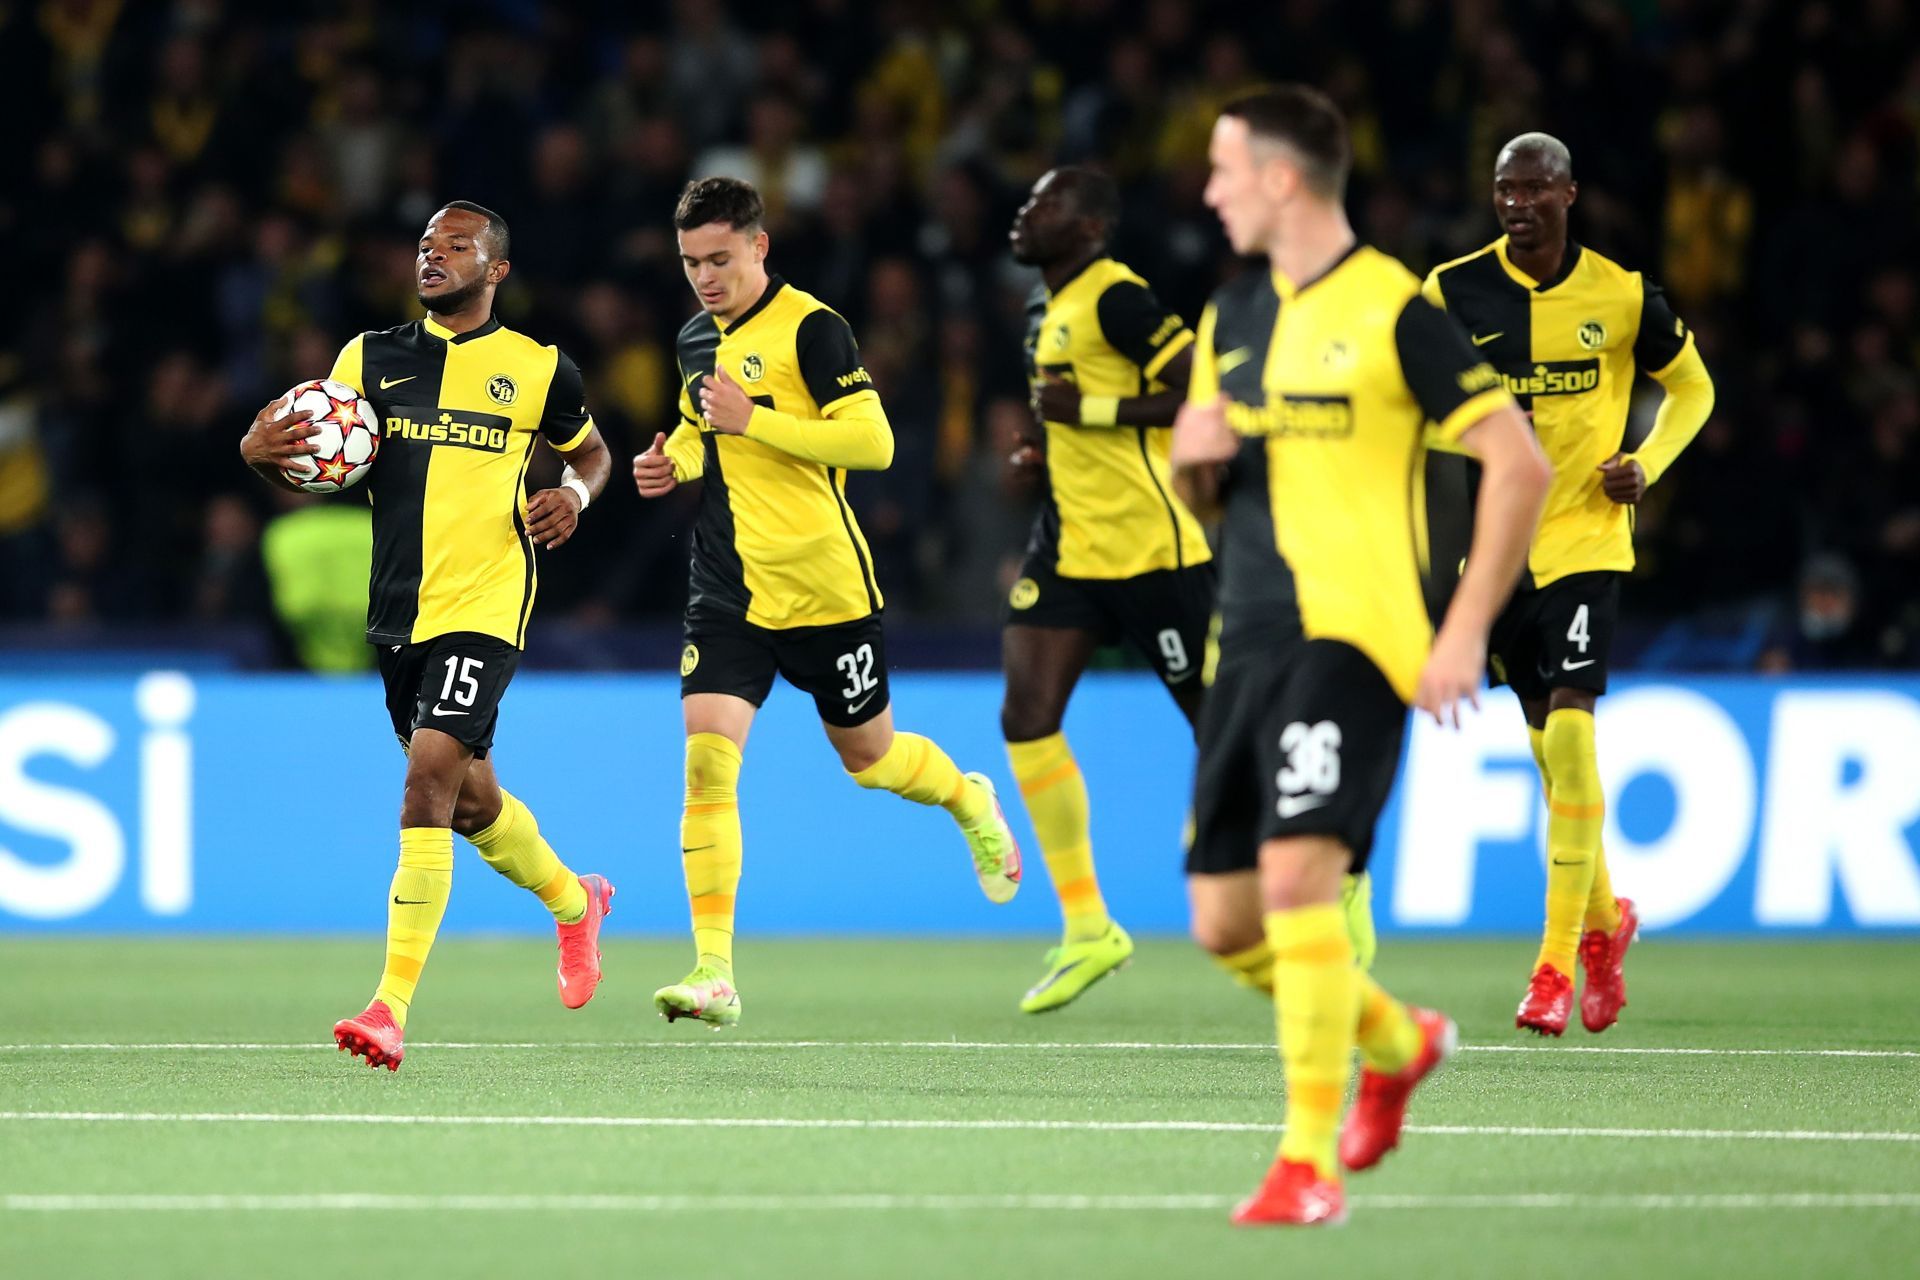 BSC Young Boys will host Sion on Saturday